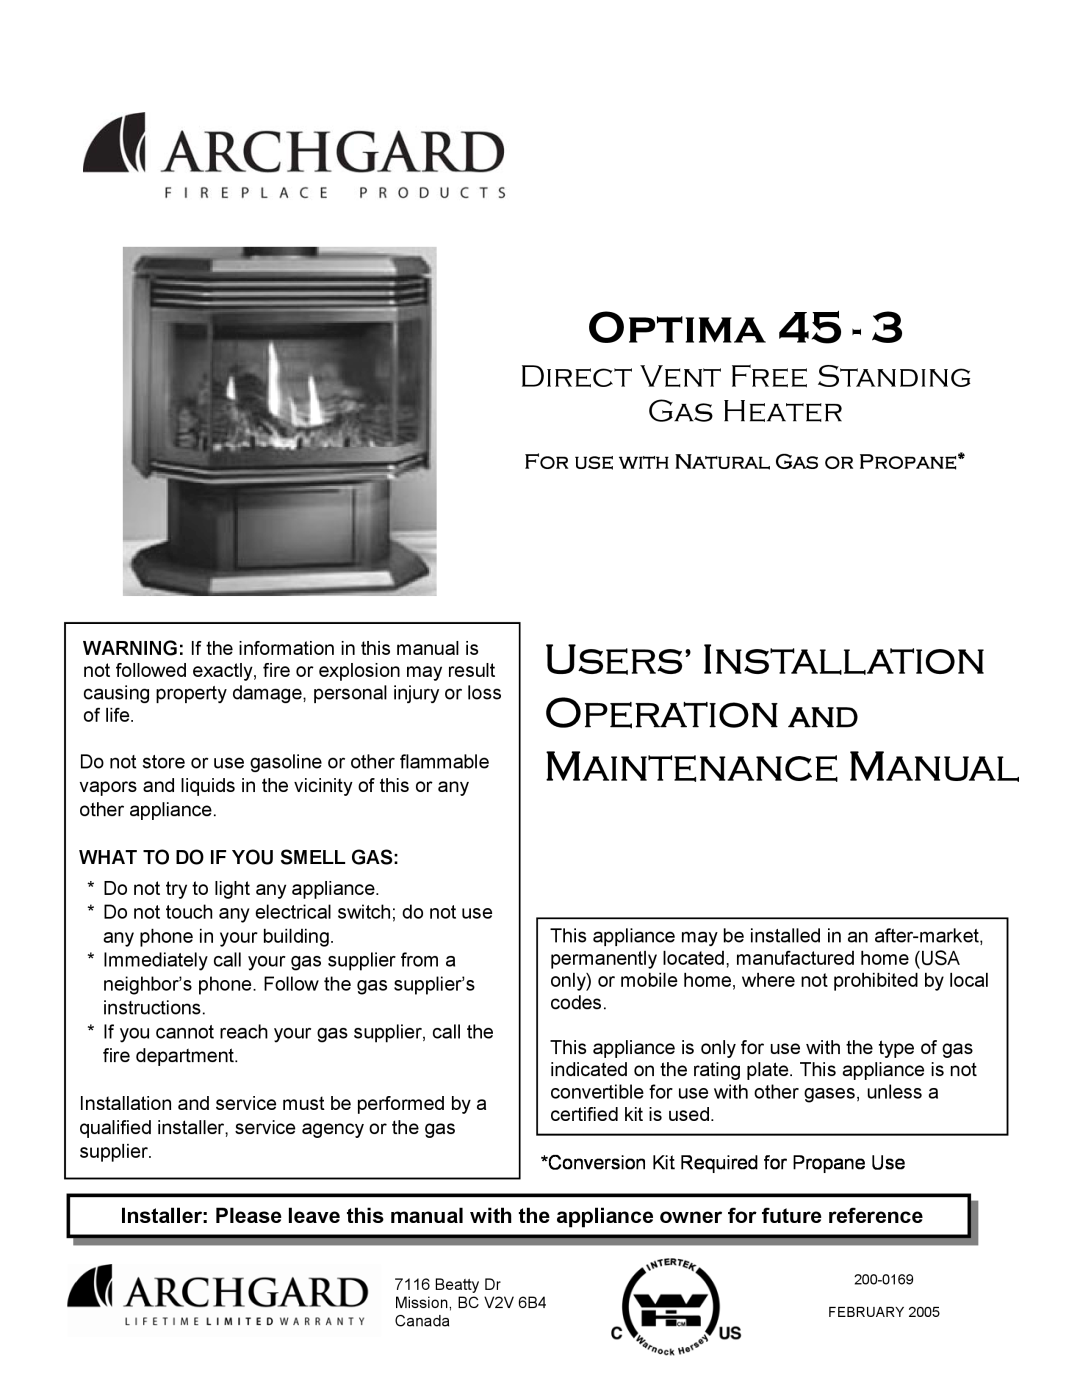 Optima Company 45 - 3 manual USERS’ INSTALLATION OPERATION and, Maintenance Manual, Optima, What To Do If You Smell Gas 